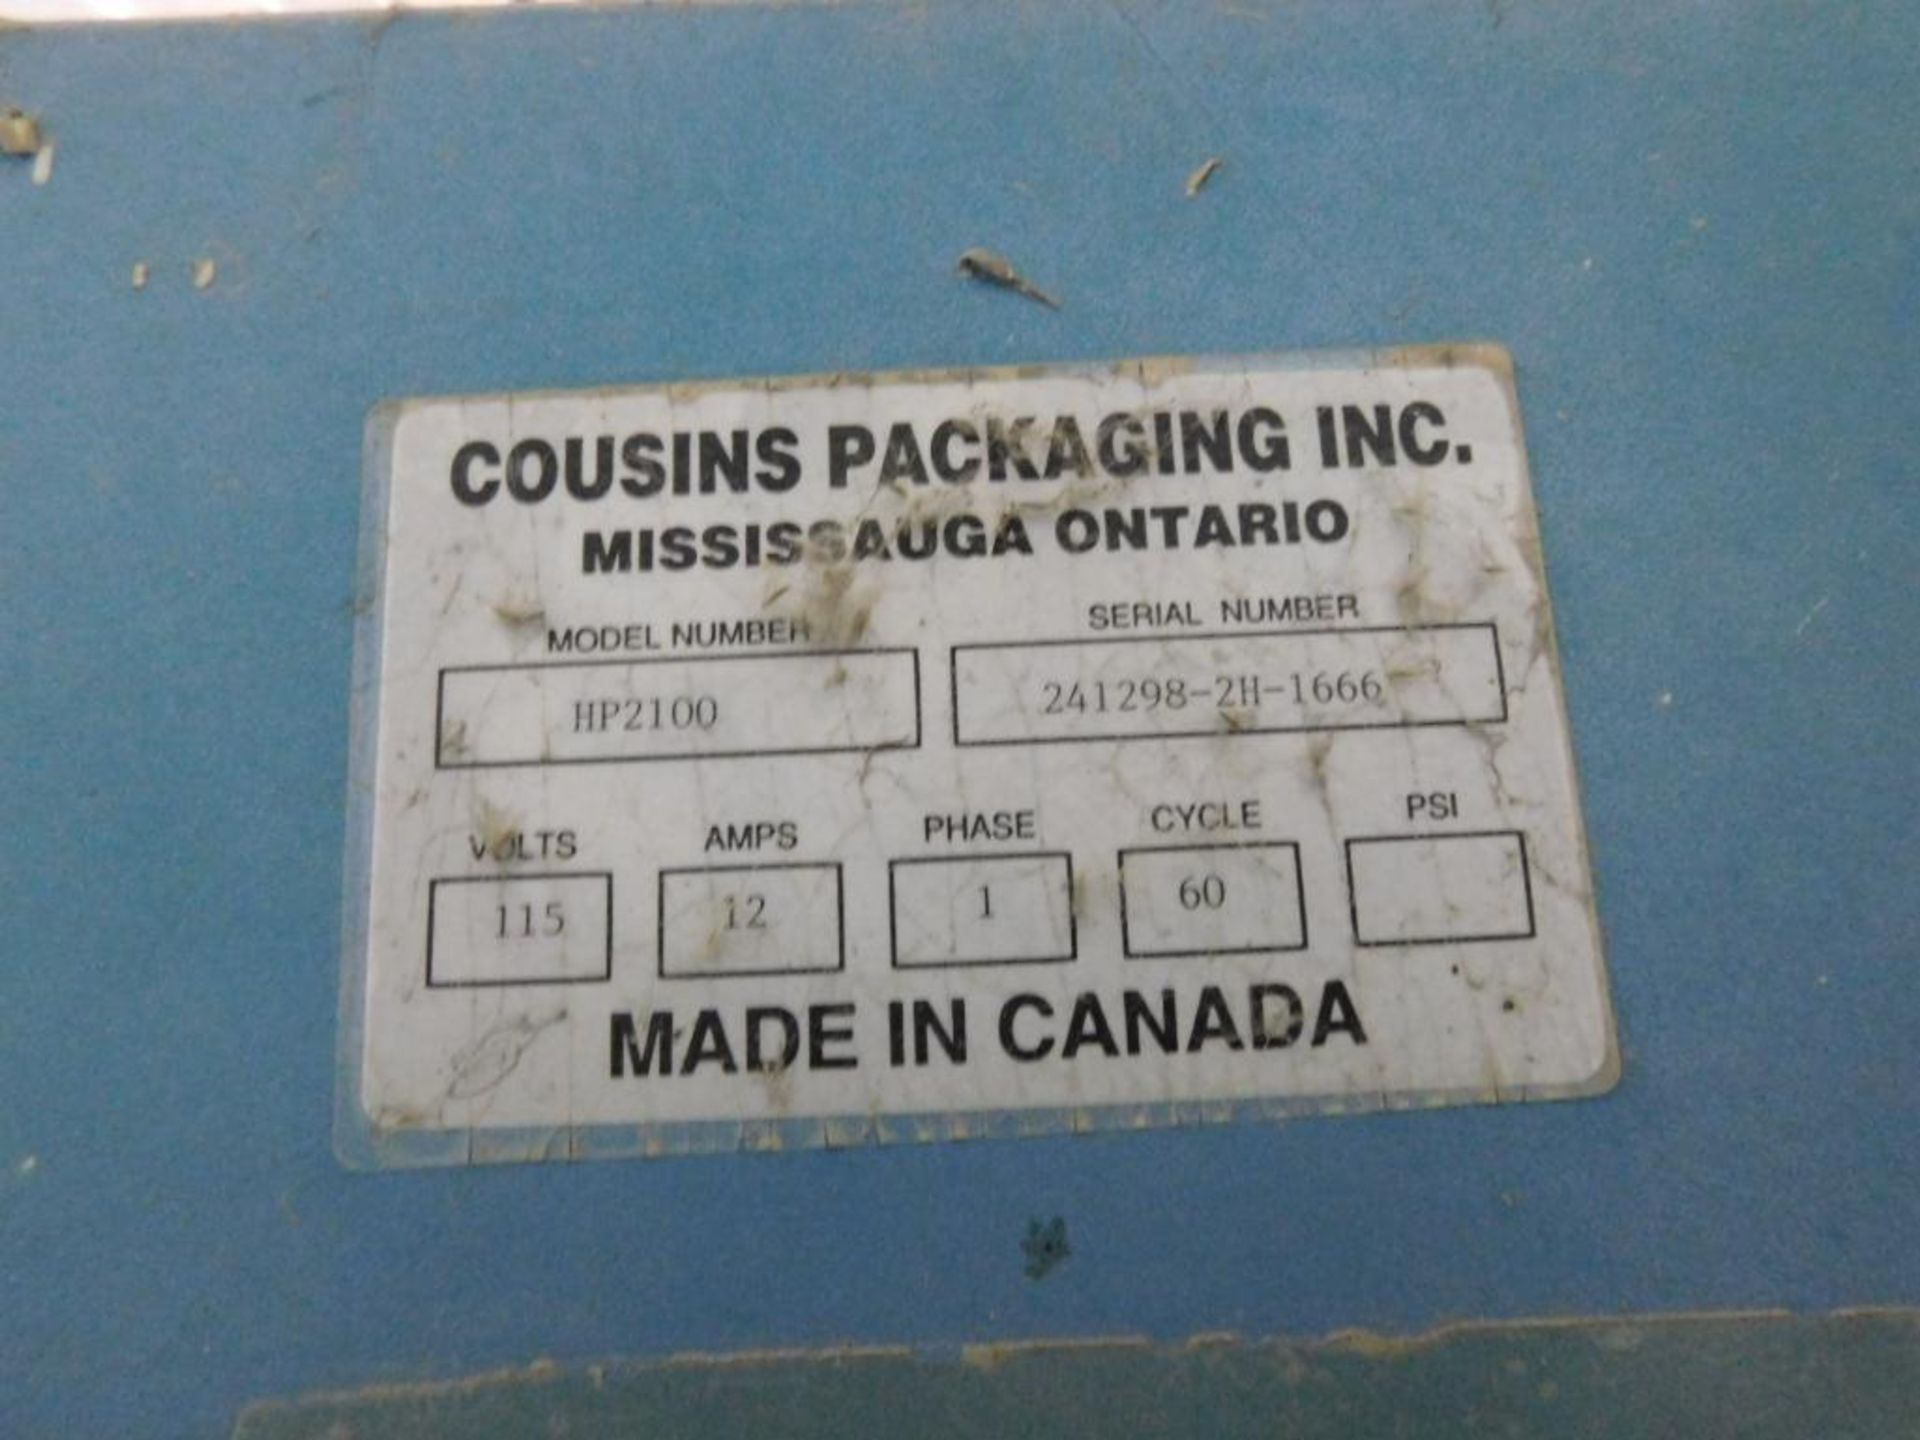 Cousins Rotary Pallet Stretch Wrapper Model HP2100, S/N 241298-214-1666, 48 in. x 48 in. Table - Image 5 of 5